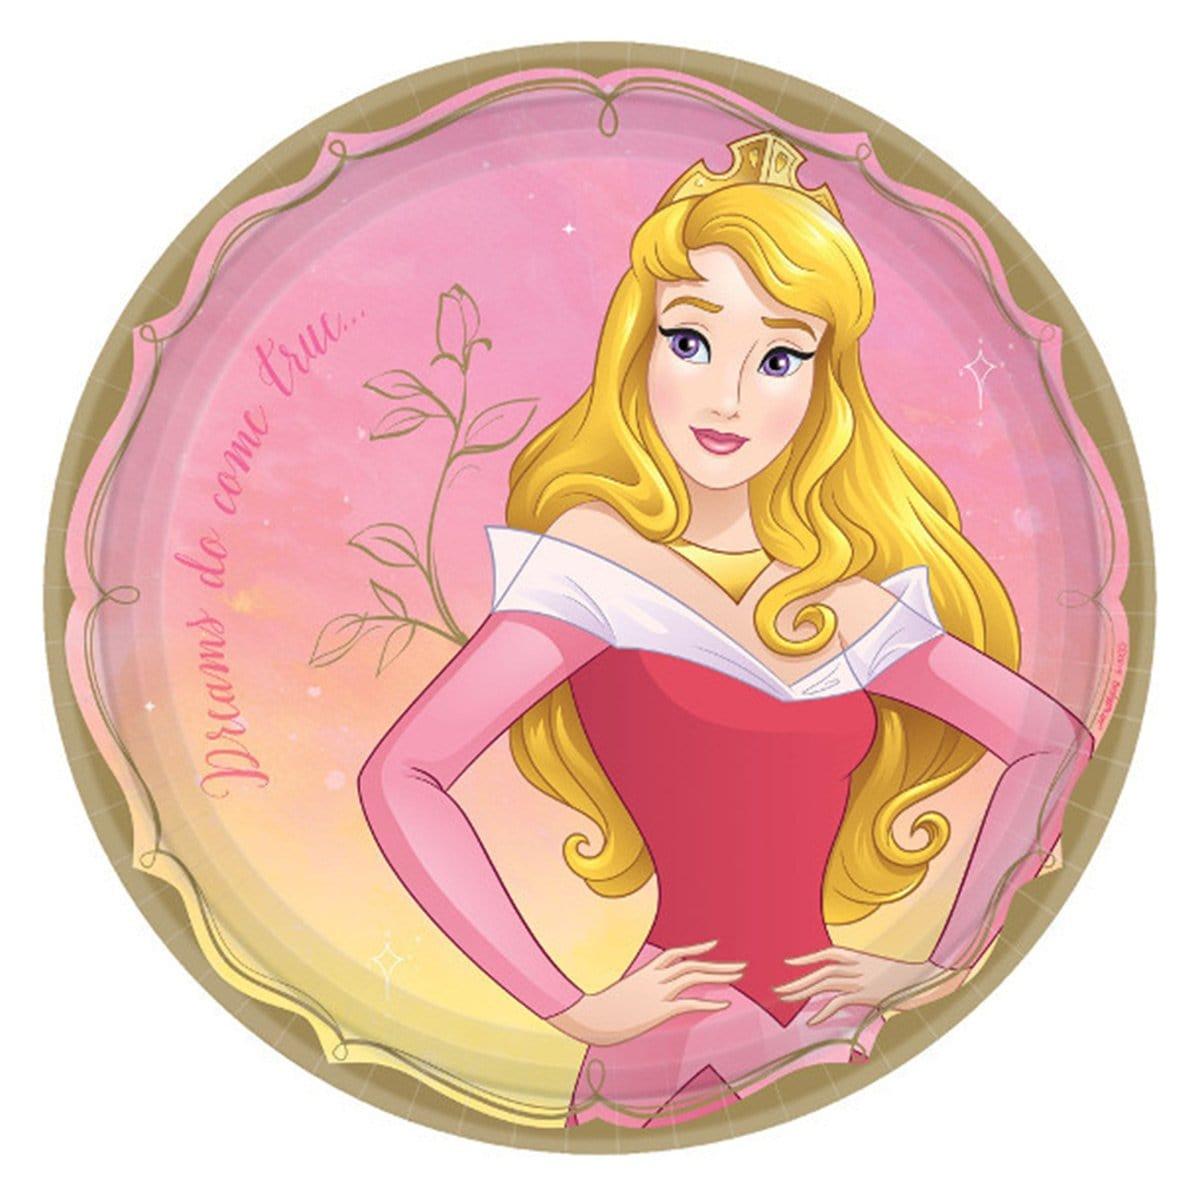 Buy Kids Birthday Once Upon A Time Aurora Dinner Plates 9 inches, 8 per package sold at Party Expert